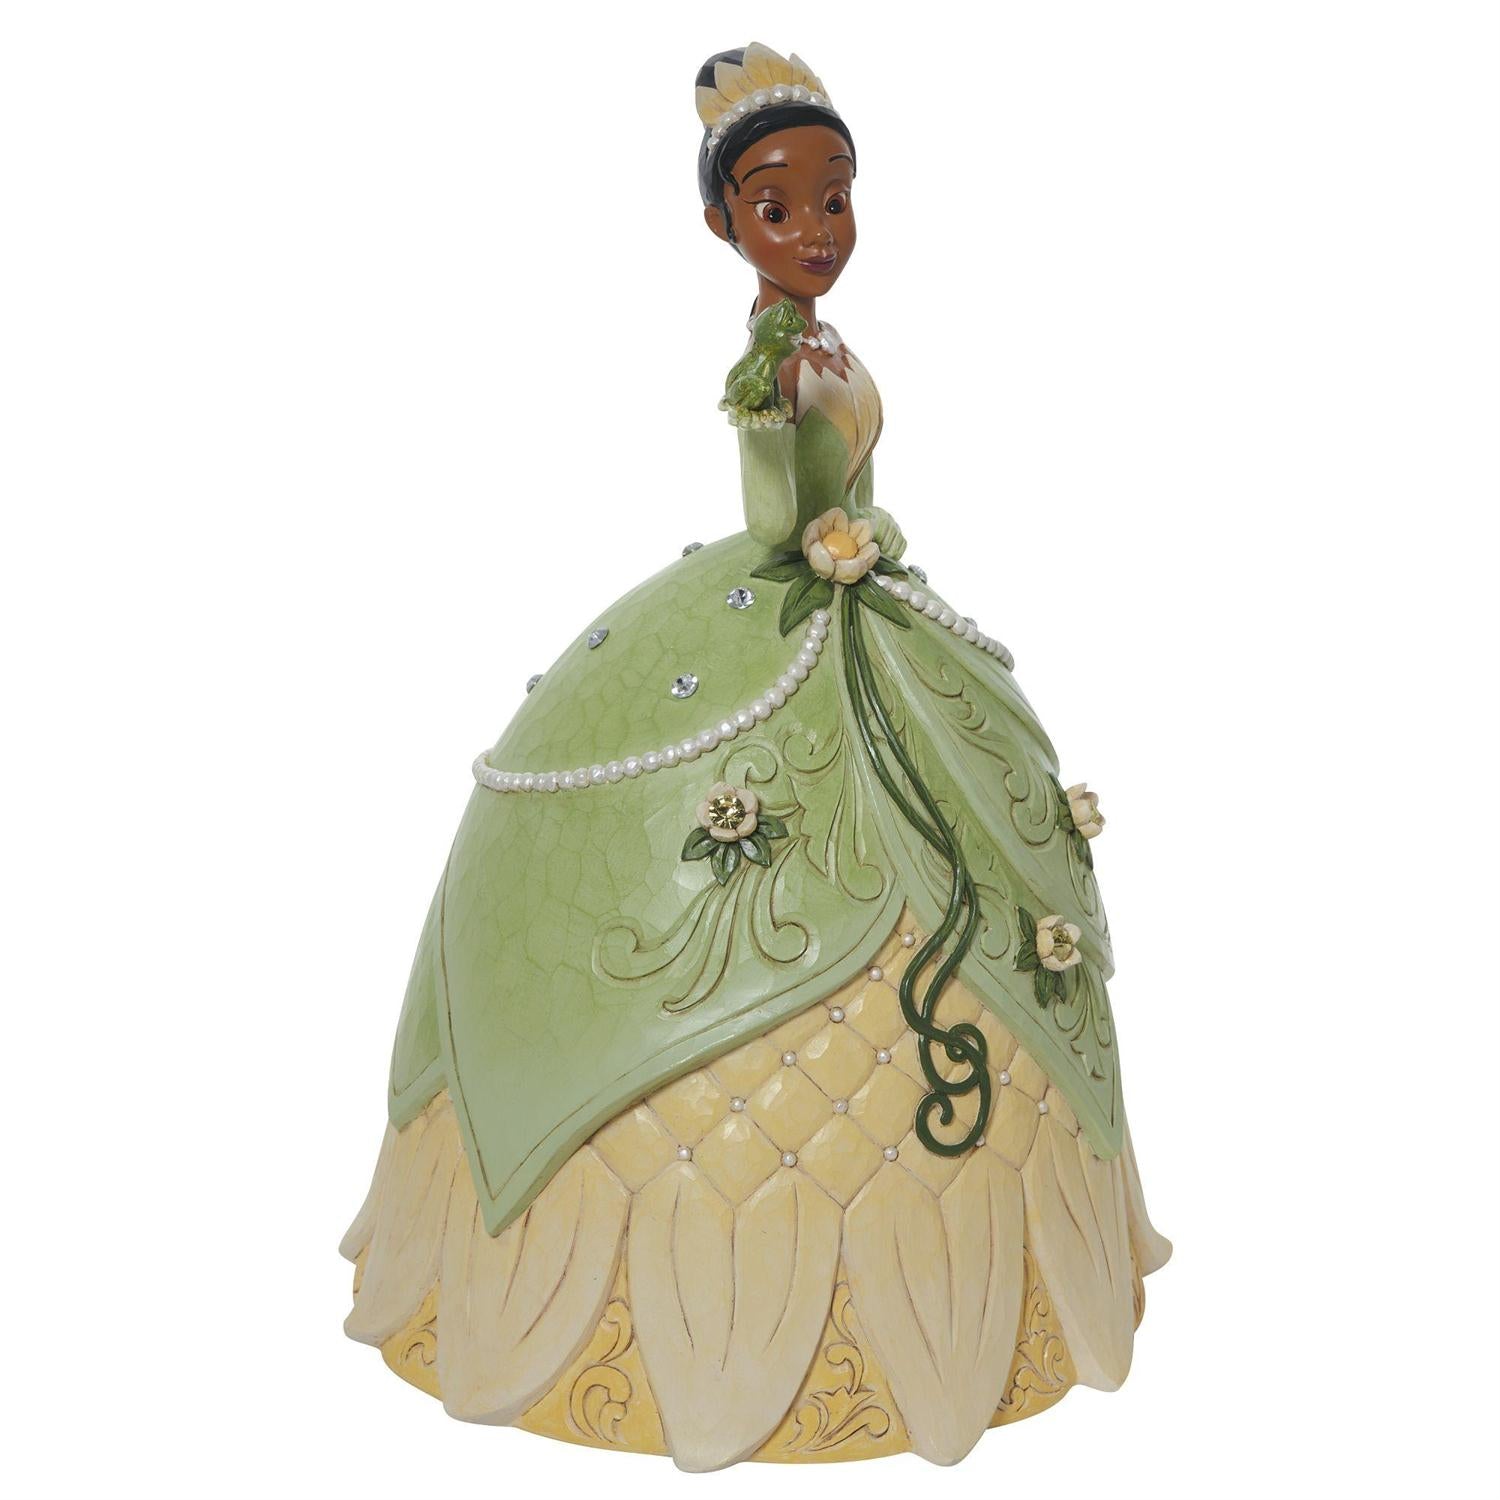 Tiana holds her soon-to-be prince, the frog, in a spectacular floral dress and tiara. - Side view